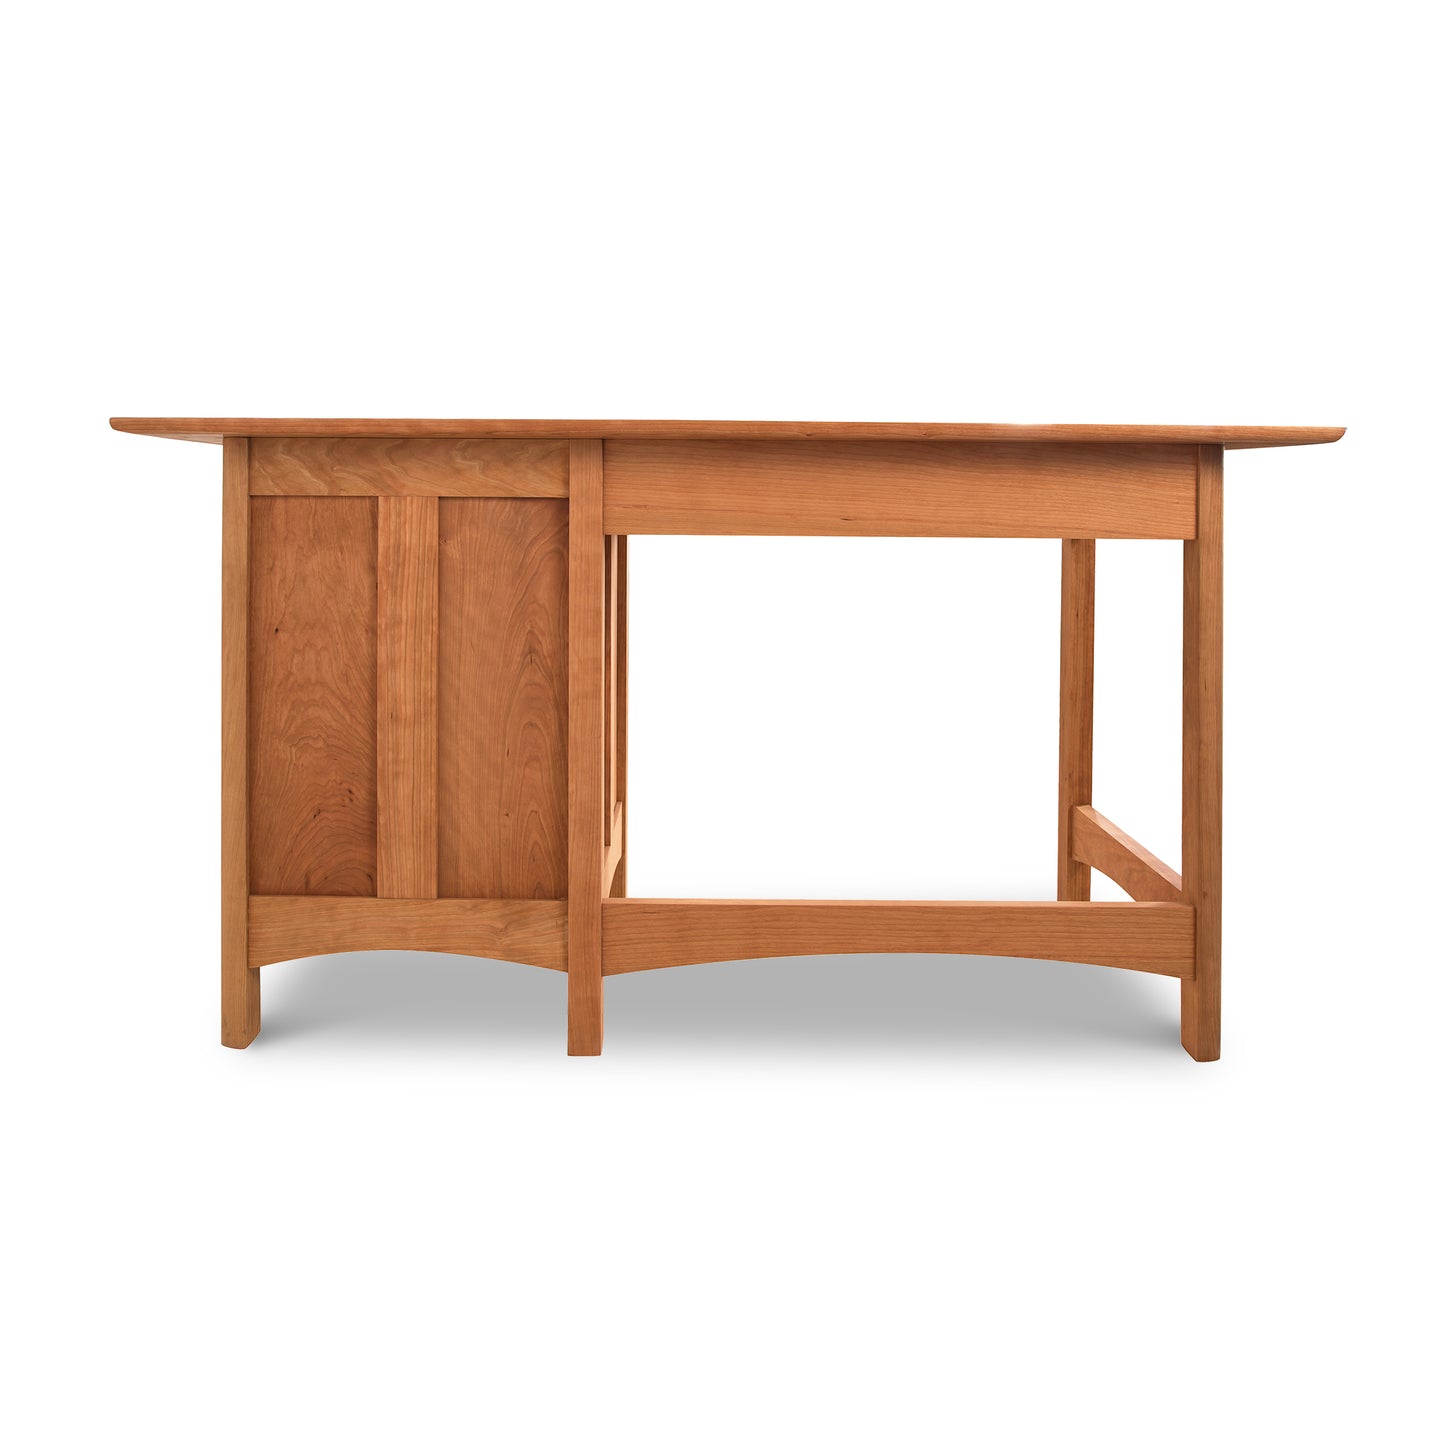 Vermont Furniture Designs Heartwood Shaker Study Desk with a single side cabinet and an open space for seating, isolated on a white background.